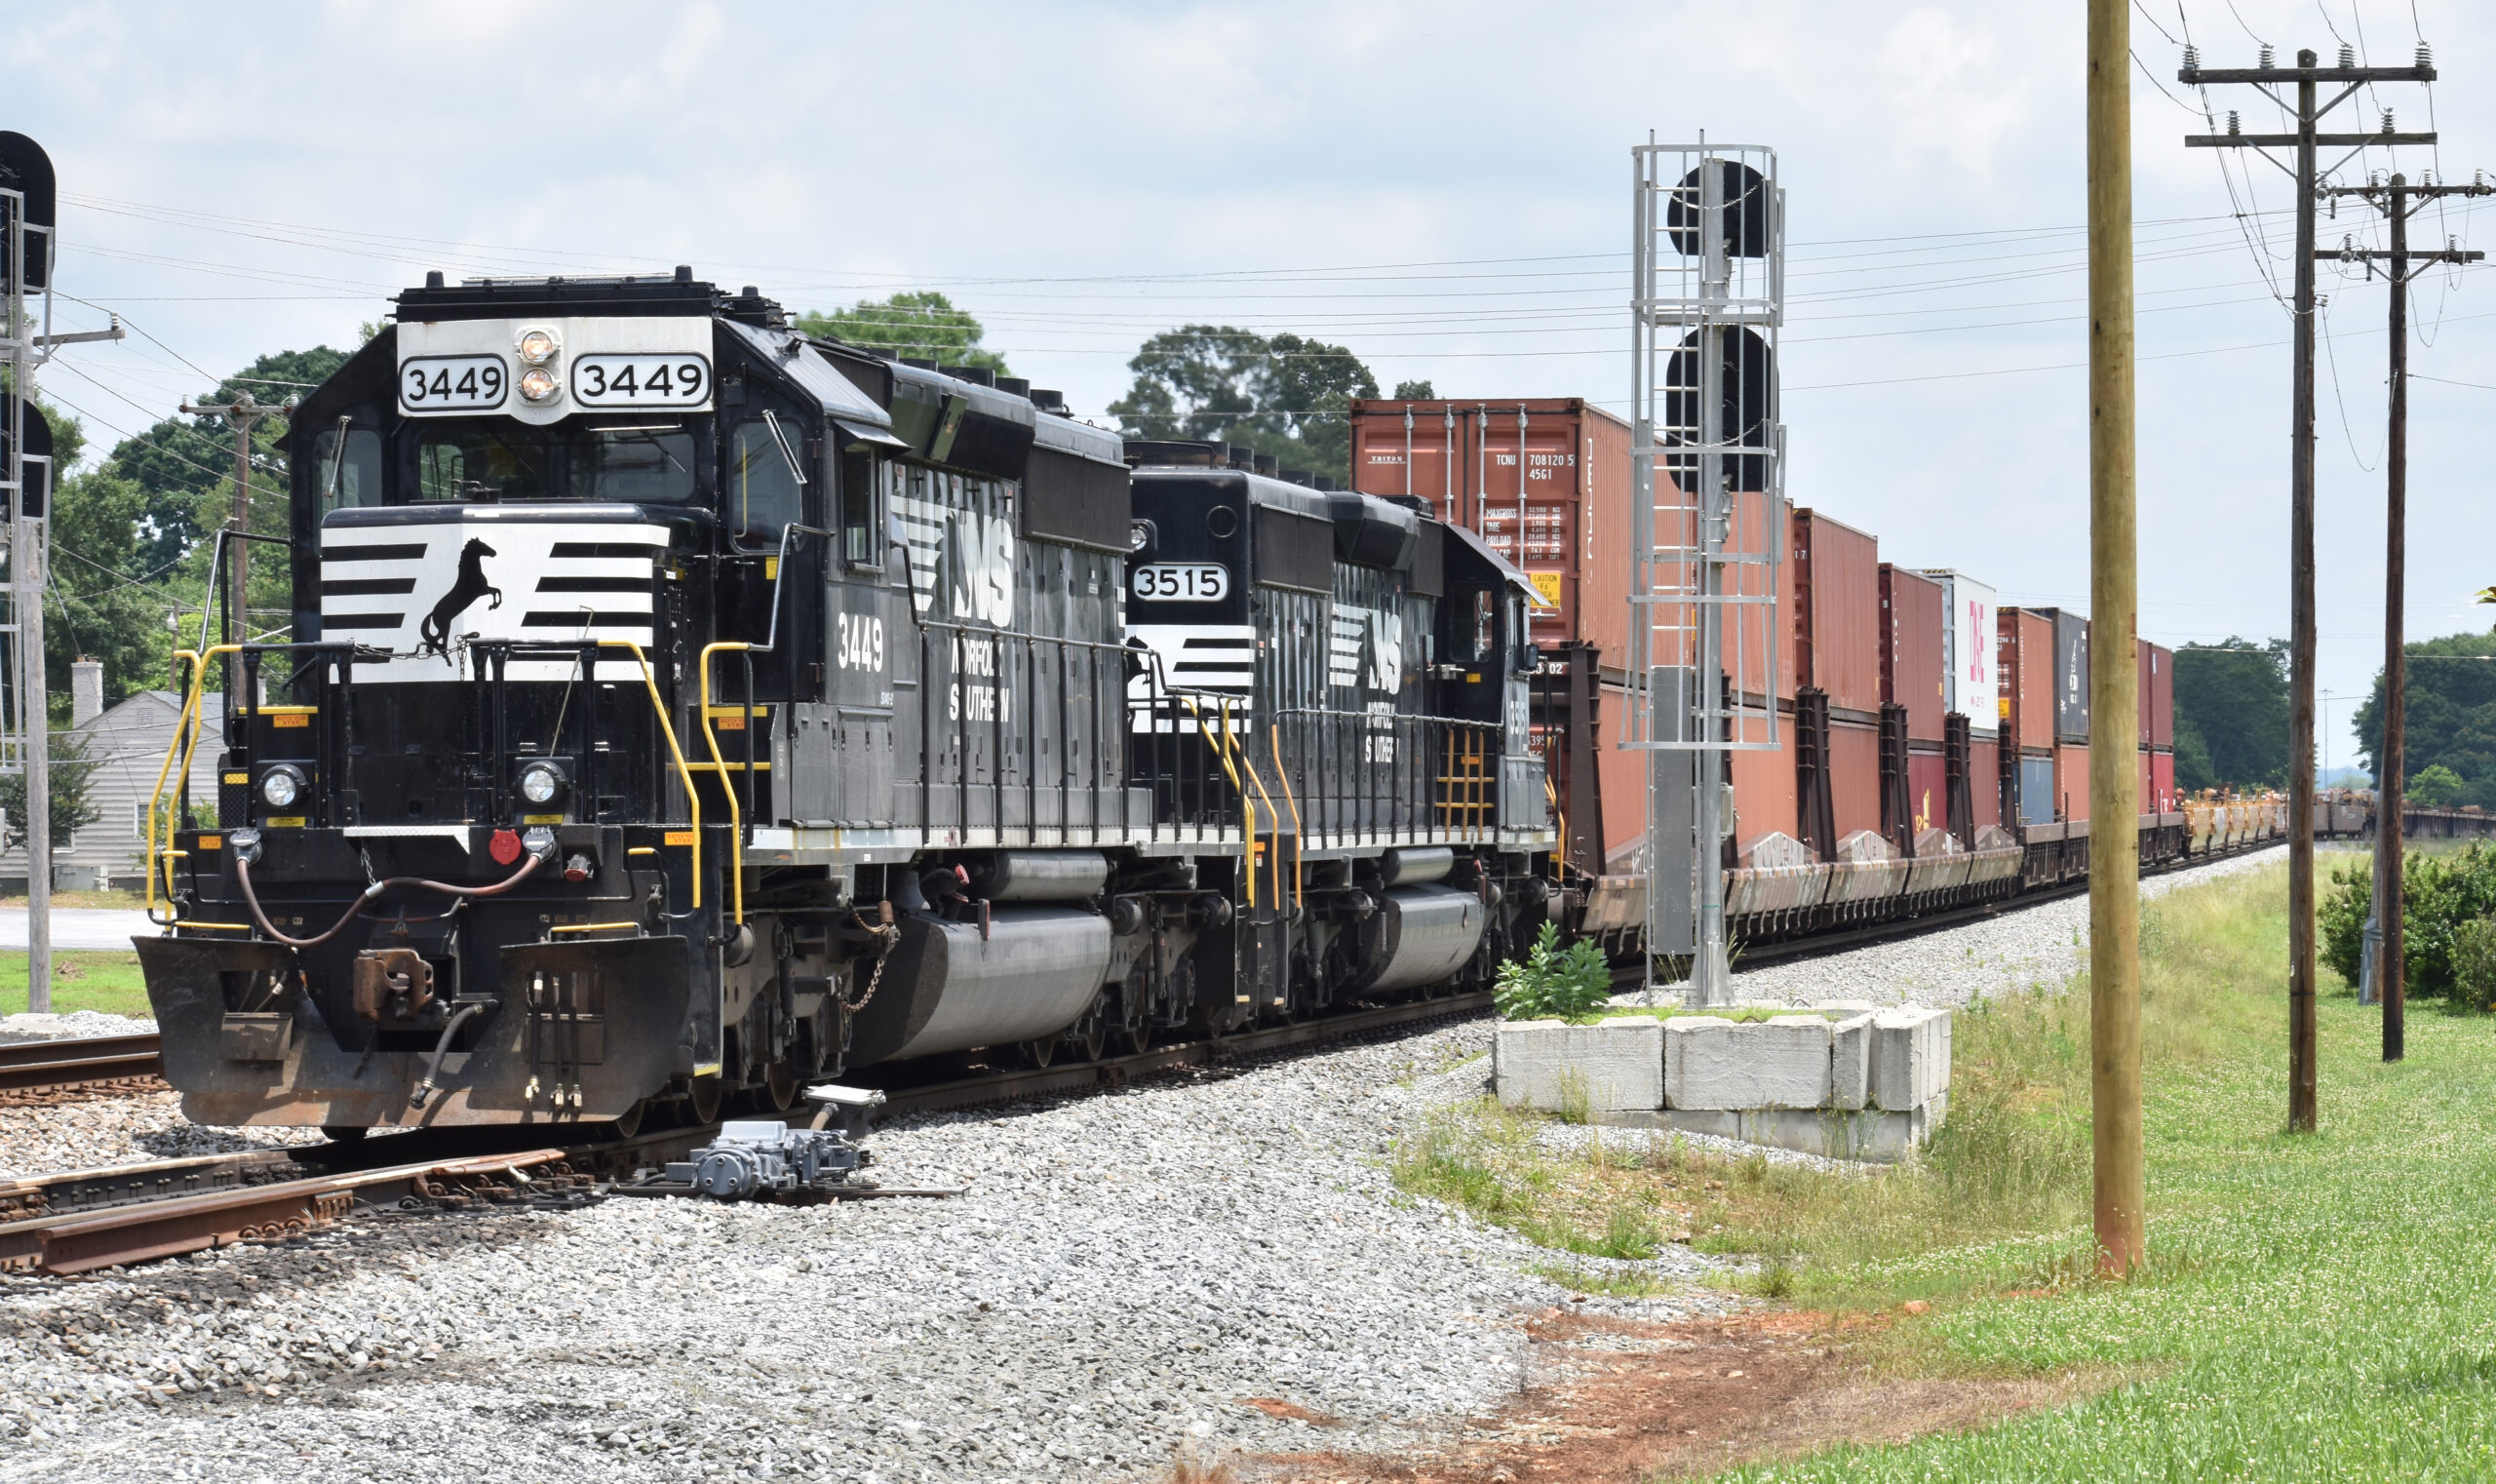 Ohioans in the U.S. House and Senate have introduced rail safety